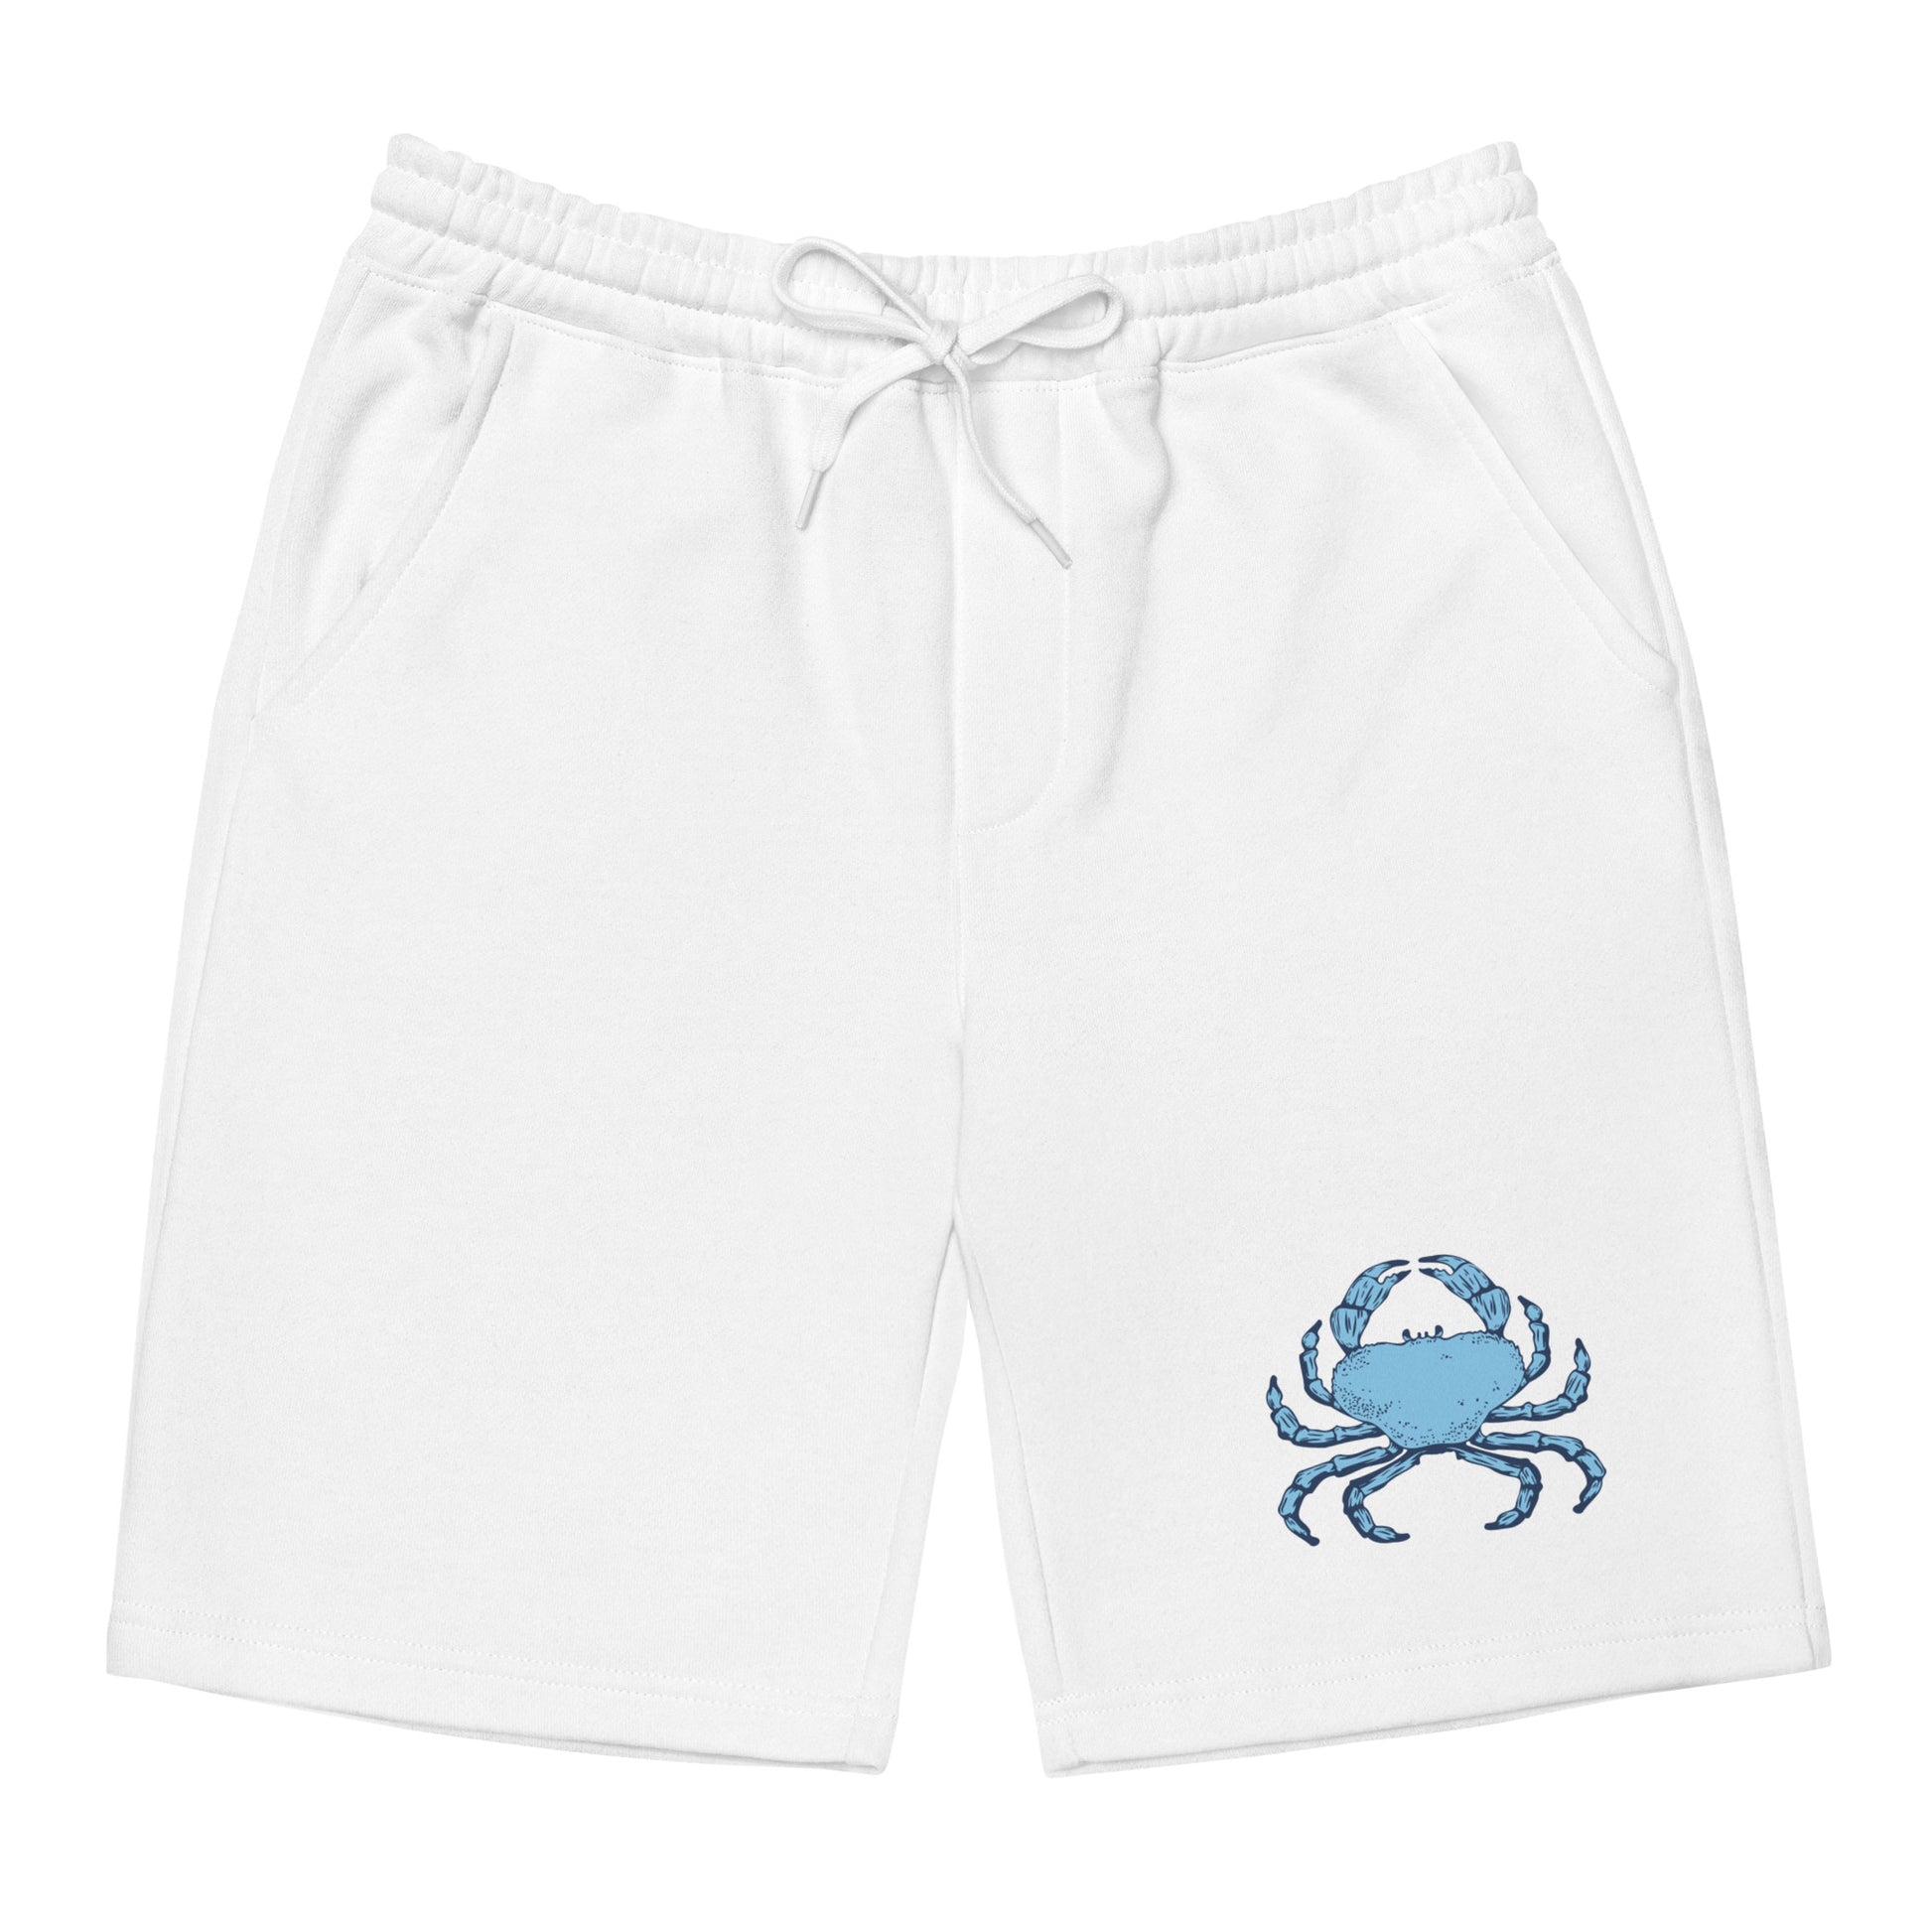 New England Seafood Company Men's fleece shorts - Tower Pizza Gift Shop